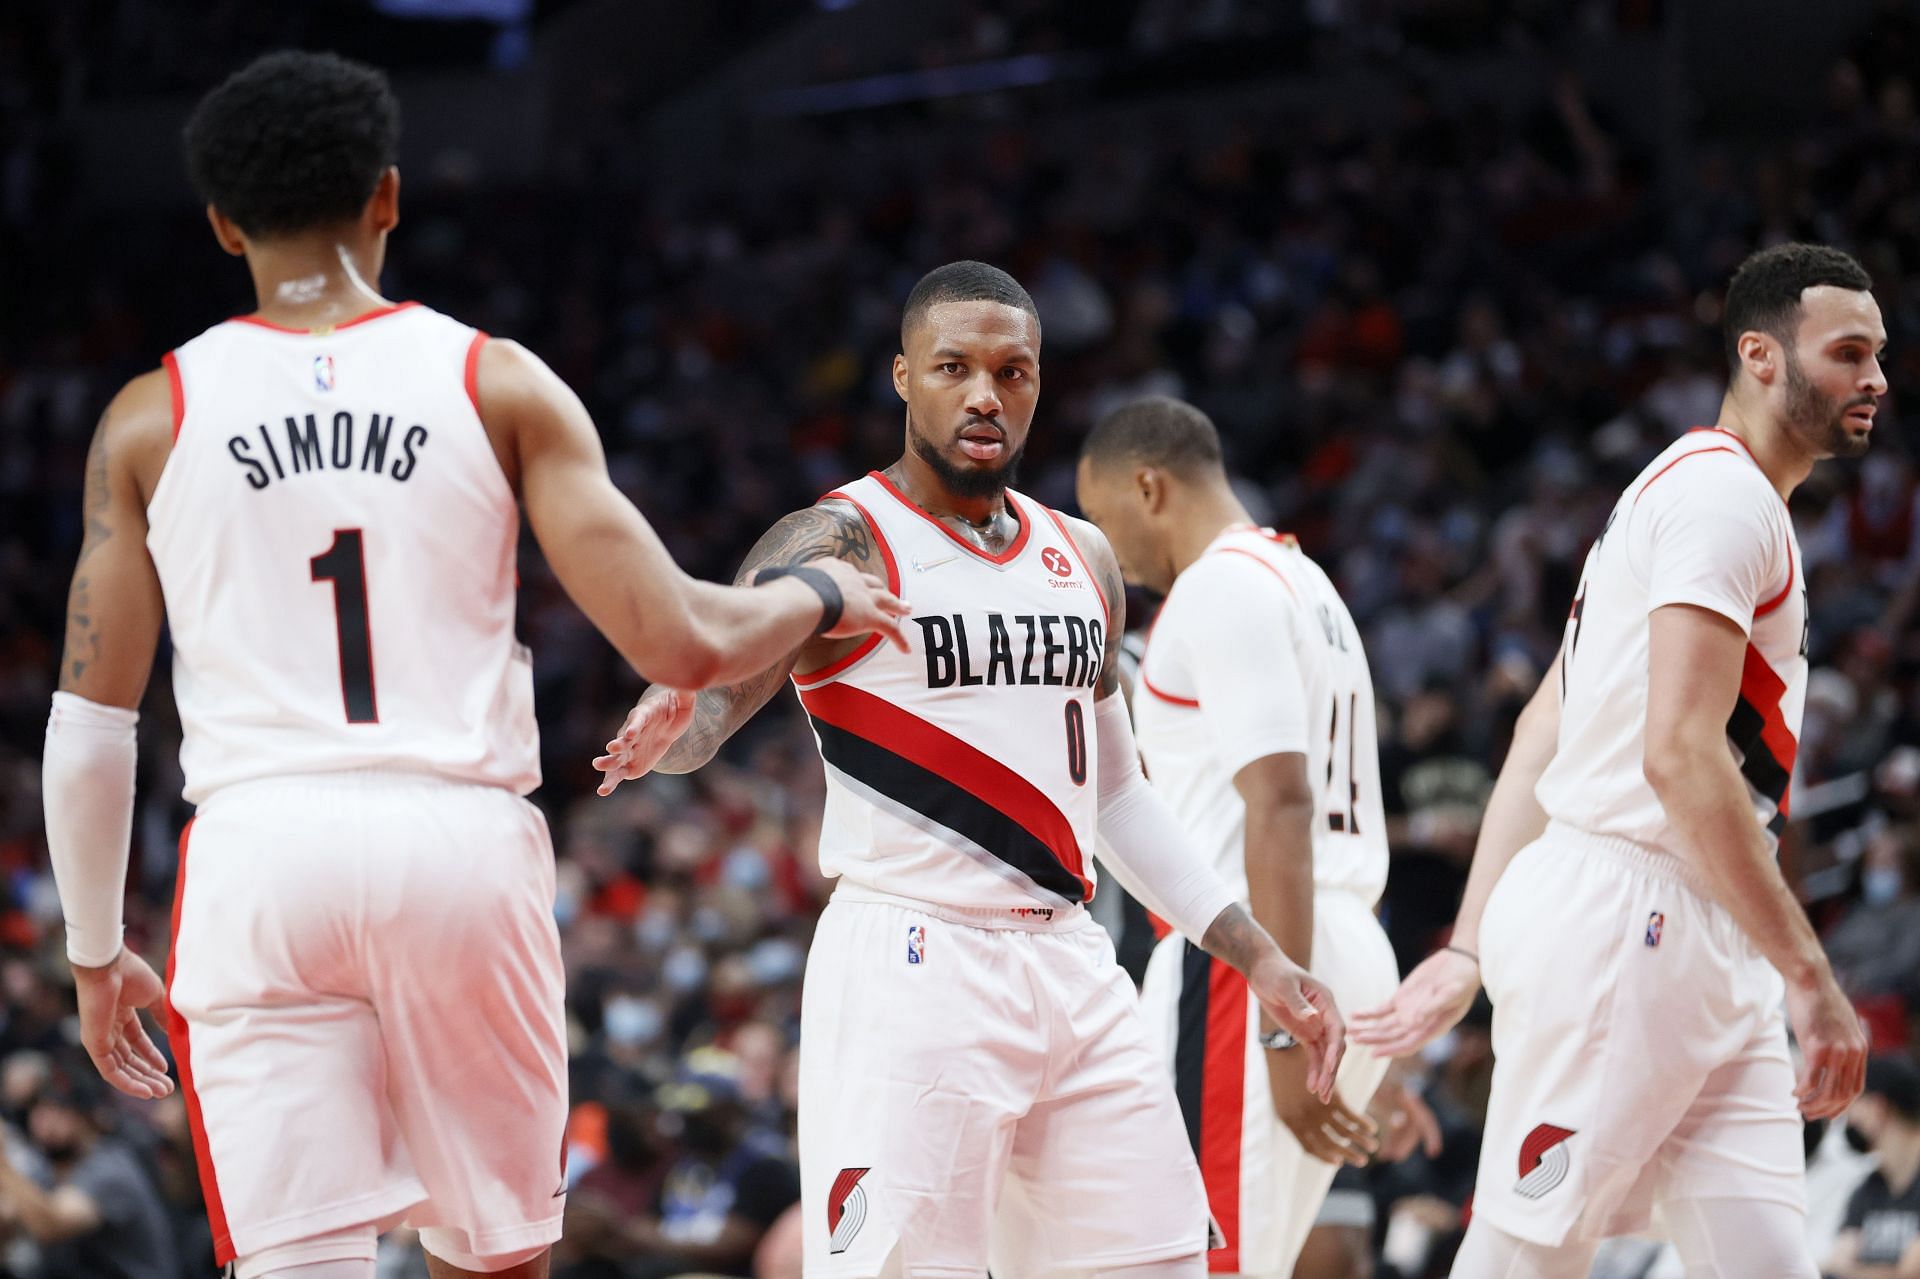 The Portland Trail Blazers suffered a 30-point blowout loss to the LA Clippers on Monday